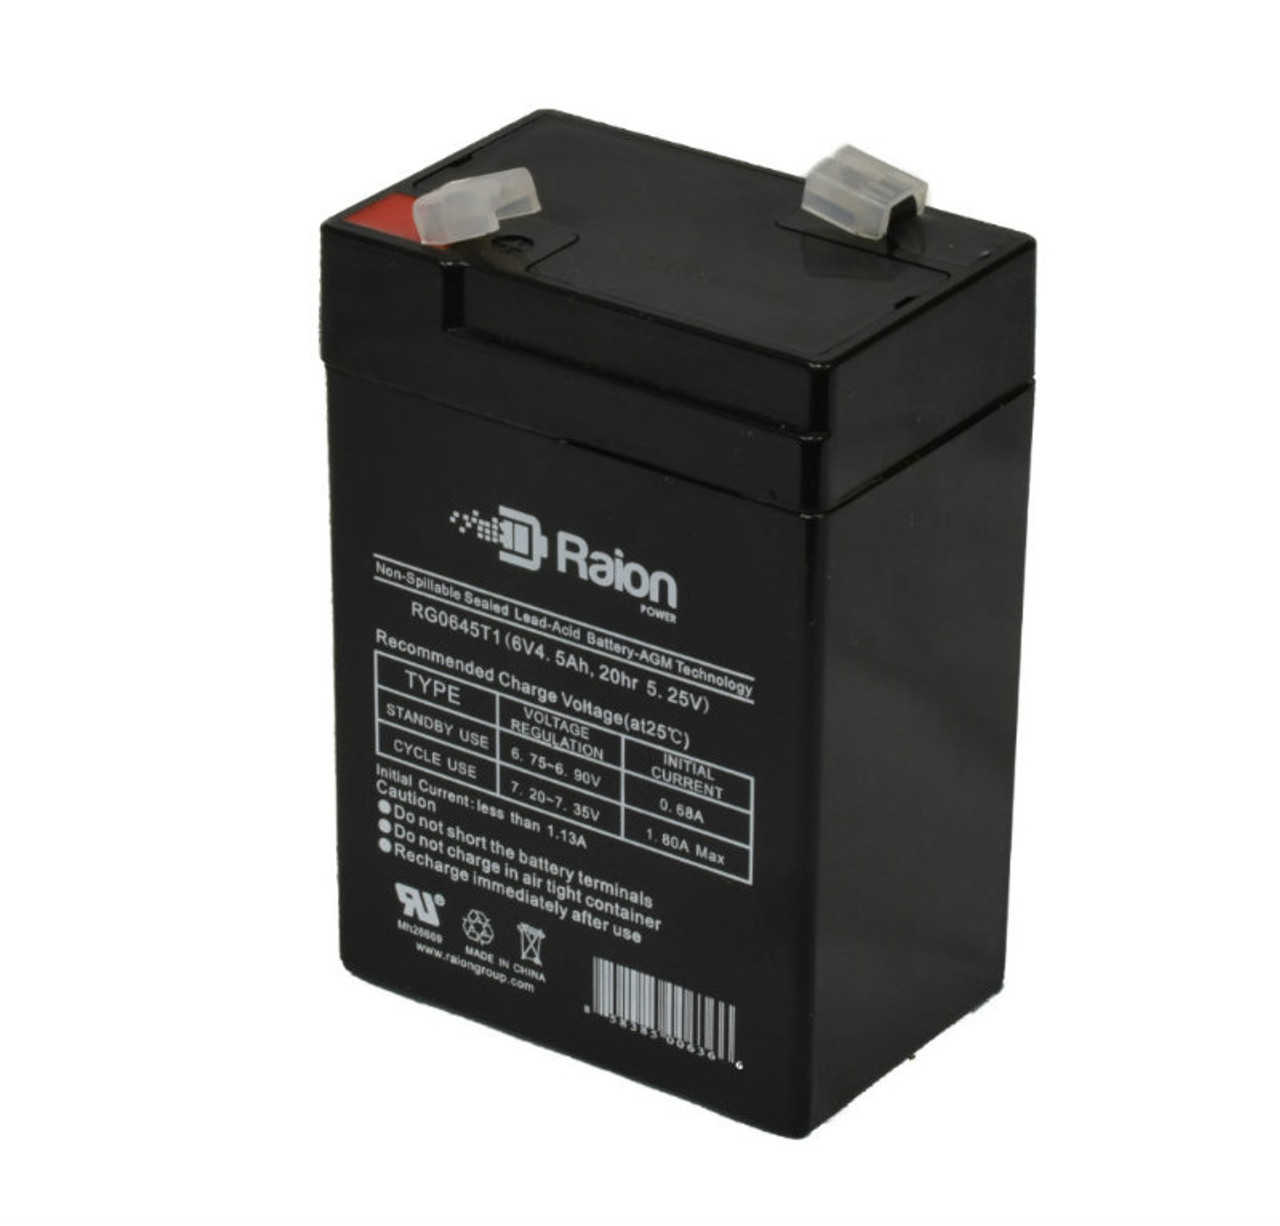 Raion Power RG0645T1 6V 4.5Ah Replacement Battery Cartridge for Embassy Crown 6CE5